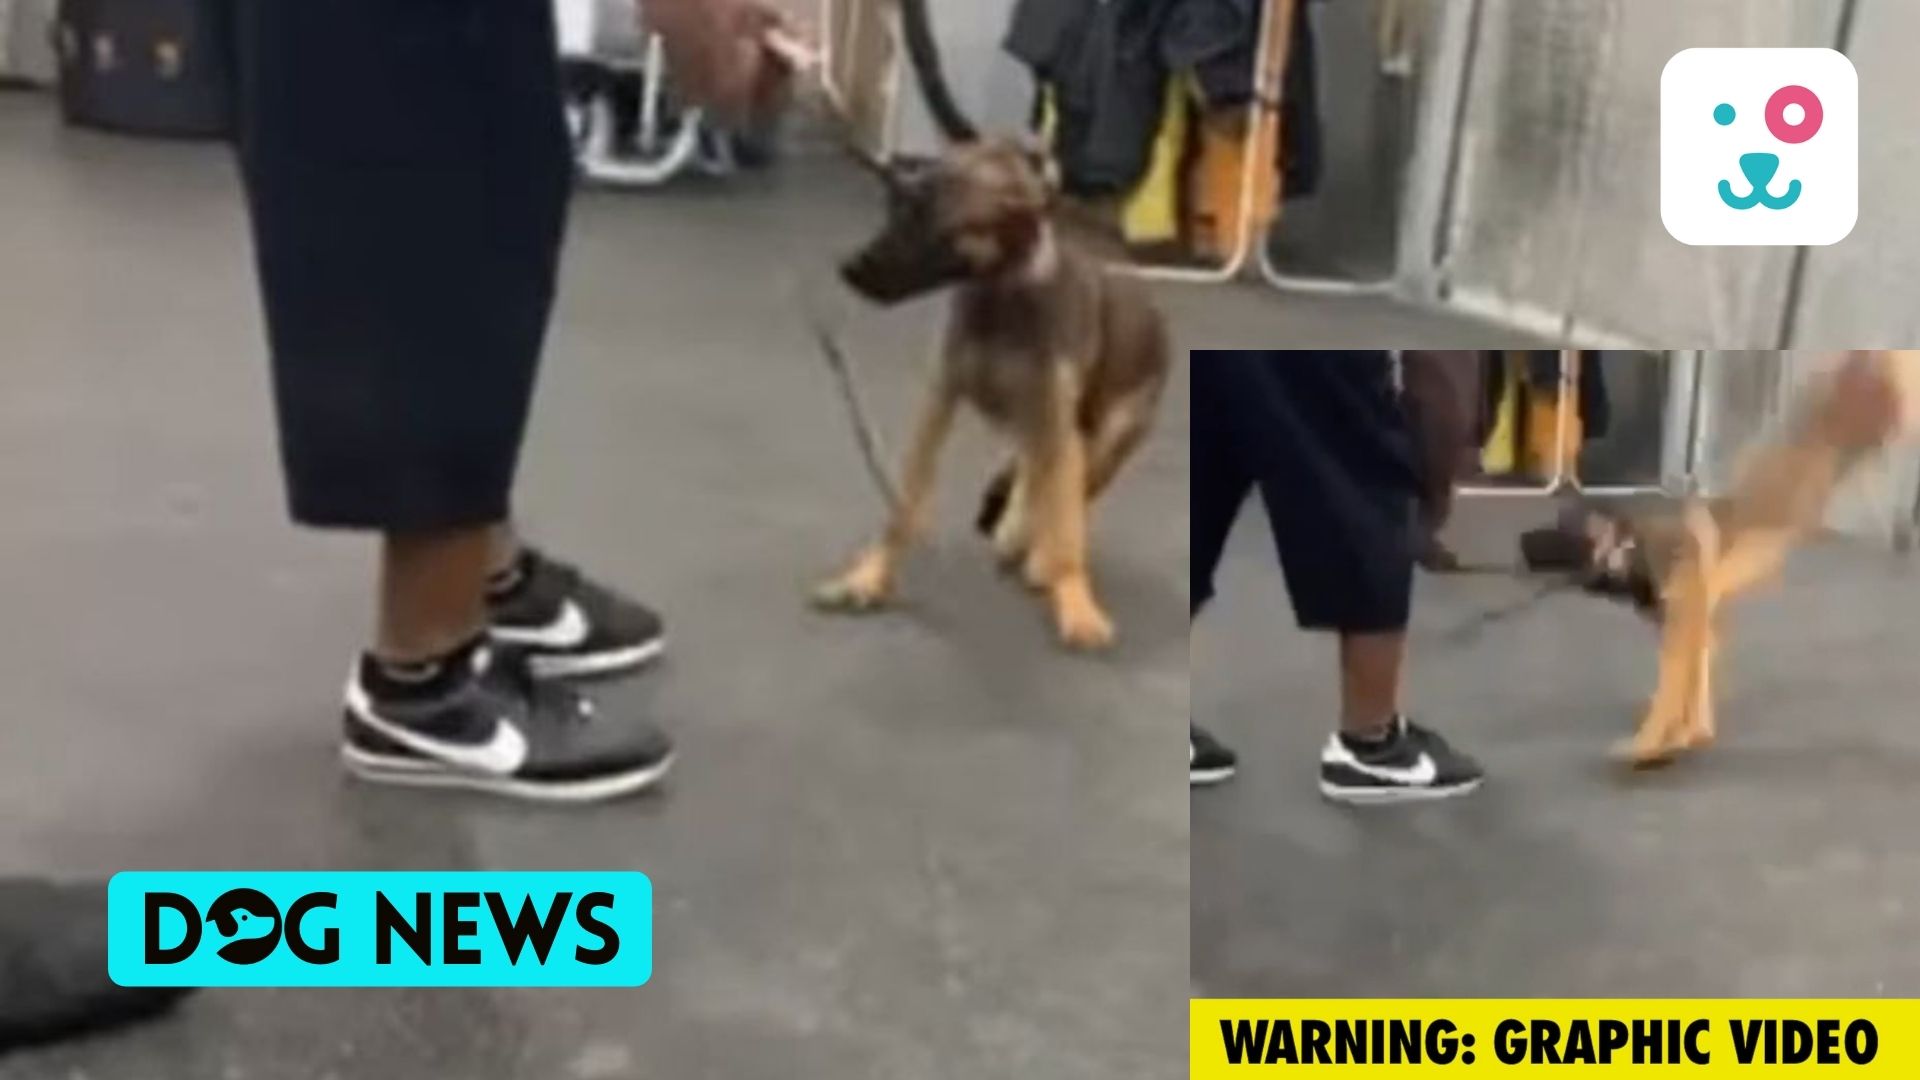 WARNING VIDEO The trainer slams a German Shepherd to the ground. Atrocity against the dog.